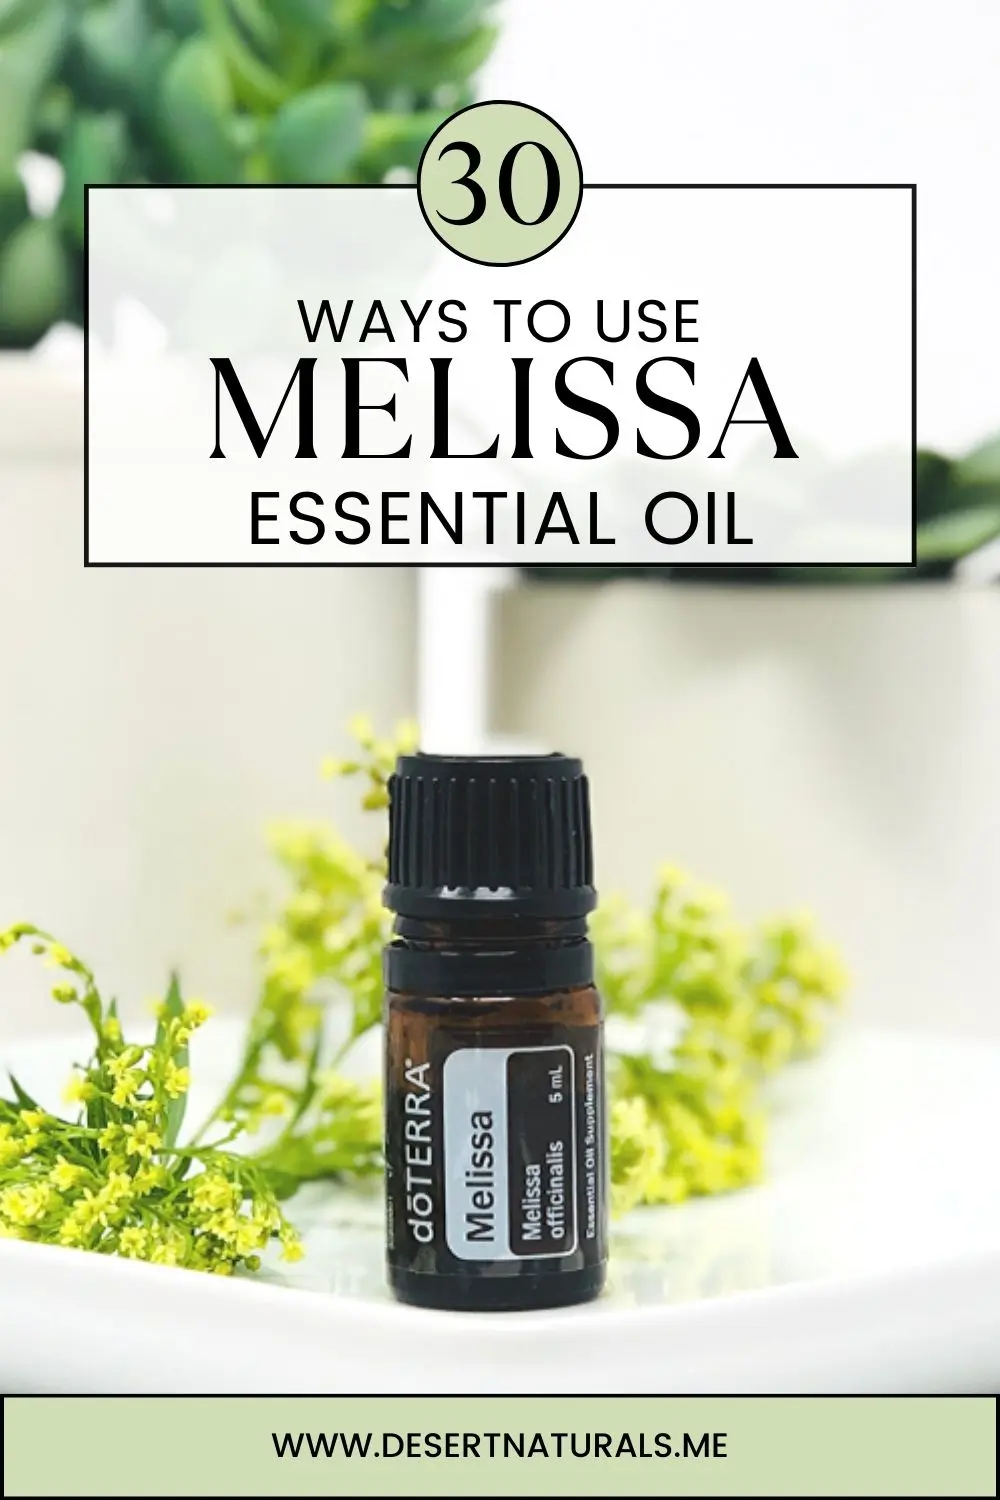 image of doterra melissa essential oil with text 30 ways to use melissa